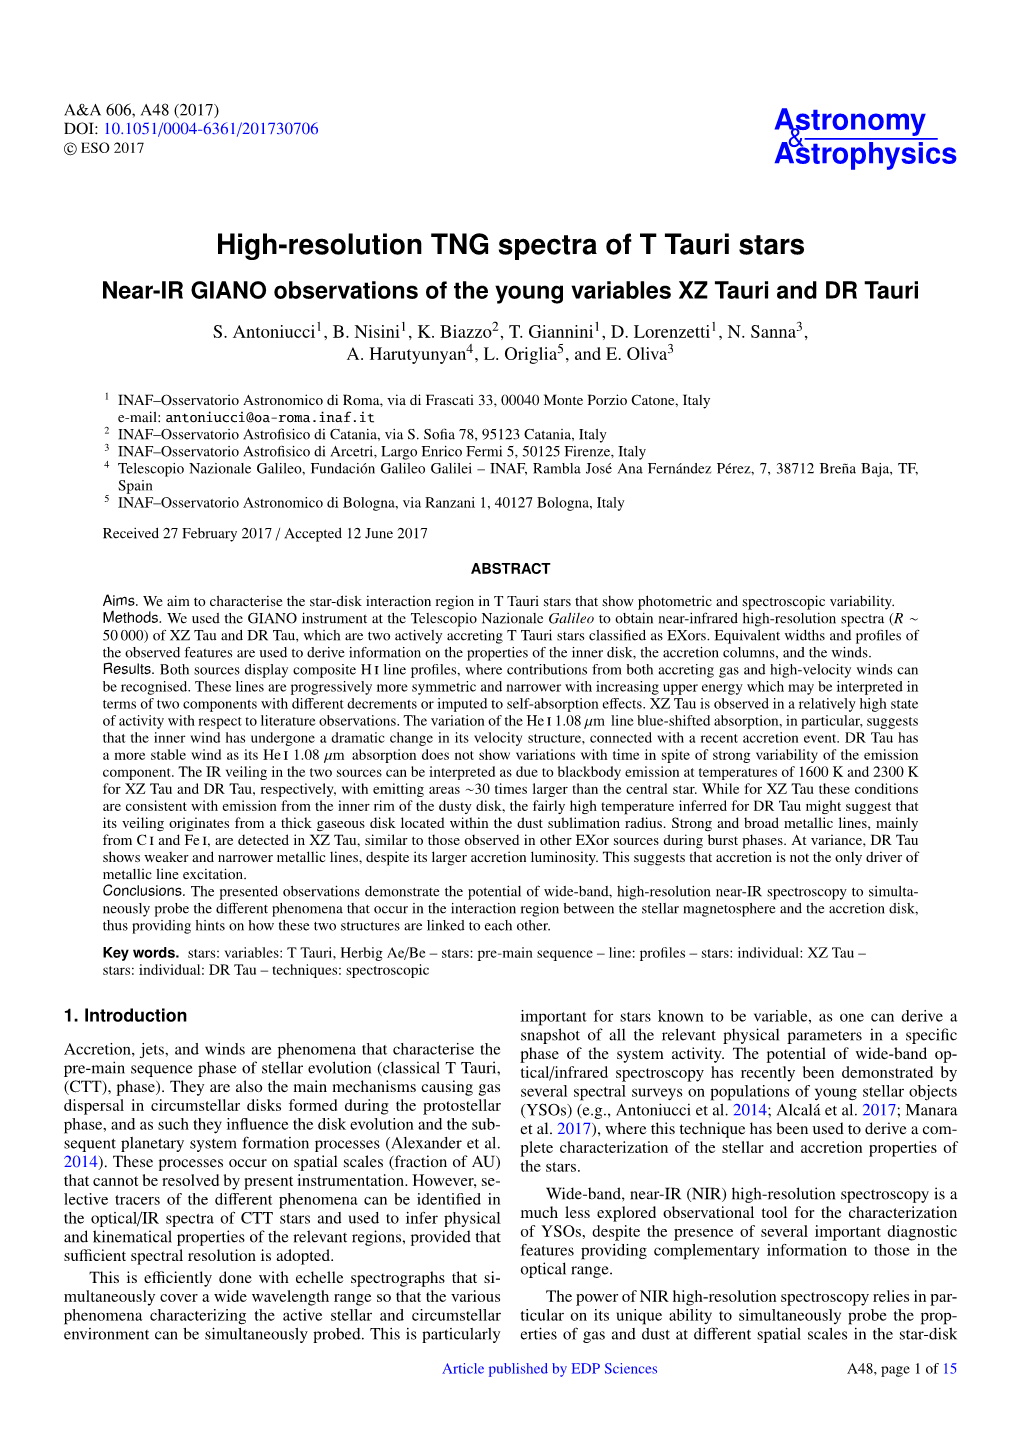 High-Resolution TNG Spectra of T Tauri Stars Near-IR GIANO Observations of the Young Variables XZ Tauri and DR Tauri